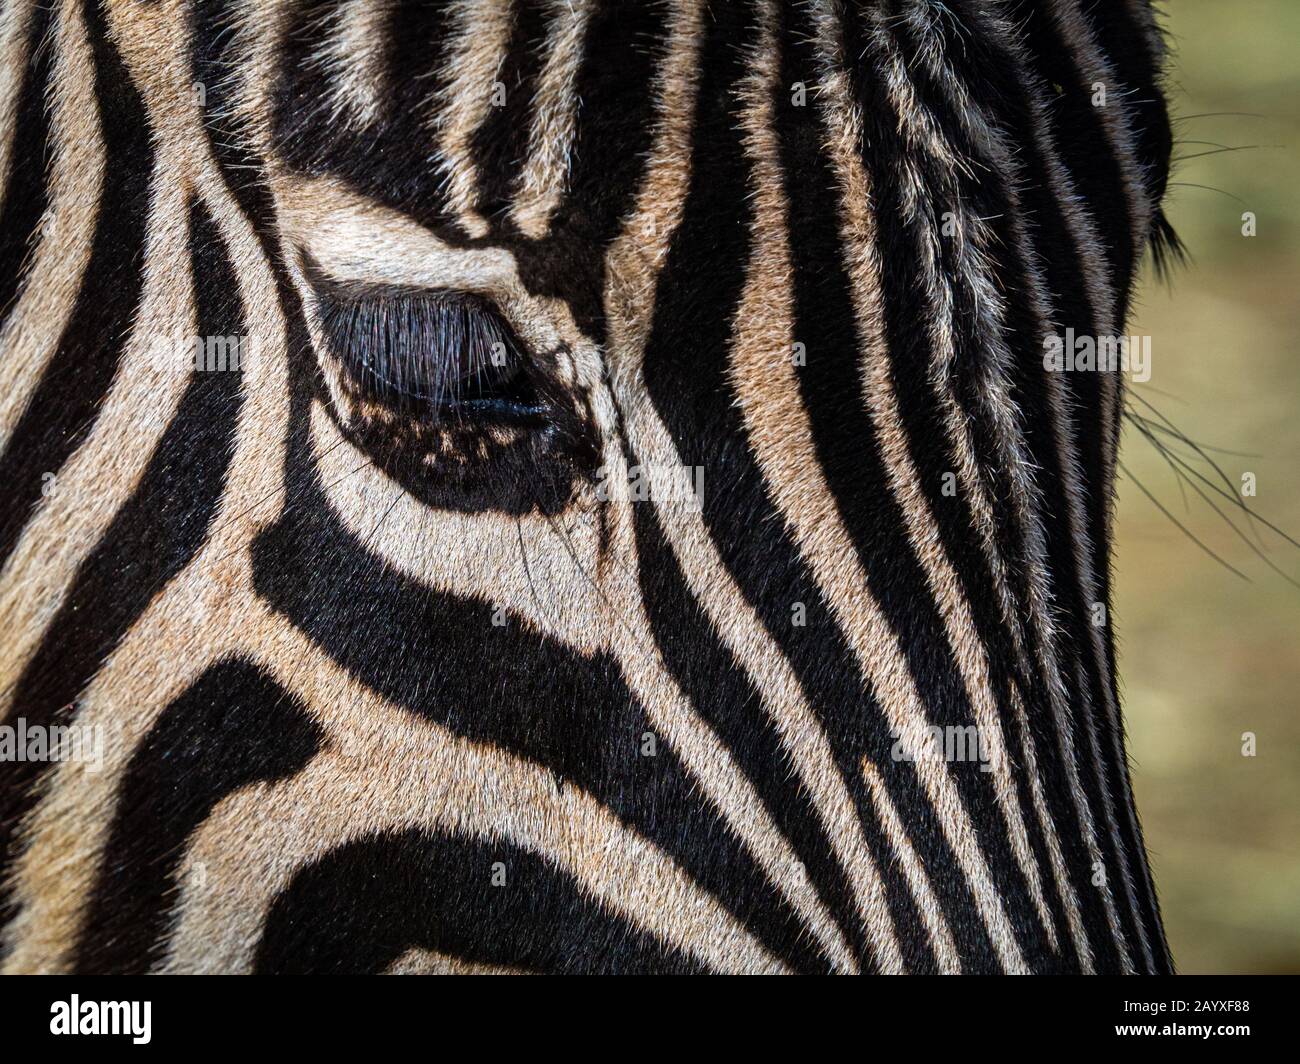 Close up of a zebra's eye and striped coat Stock Photo